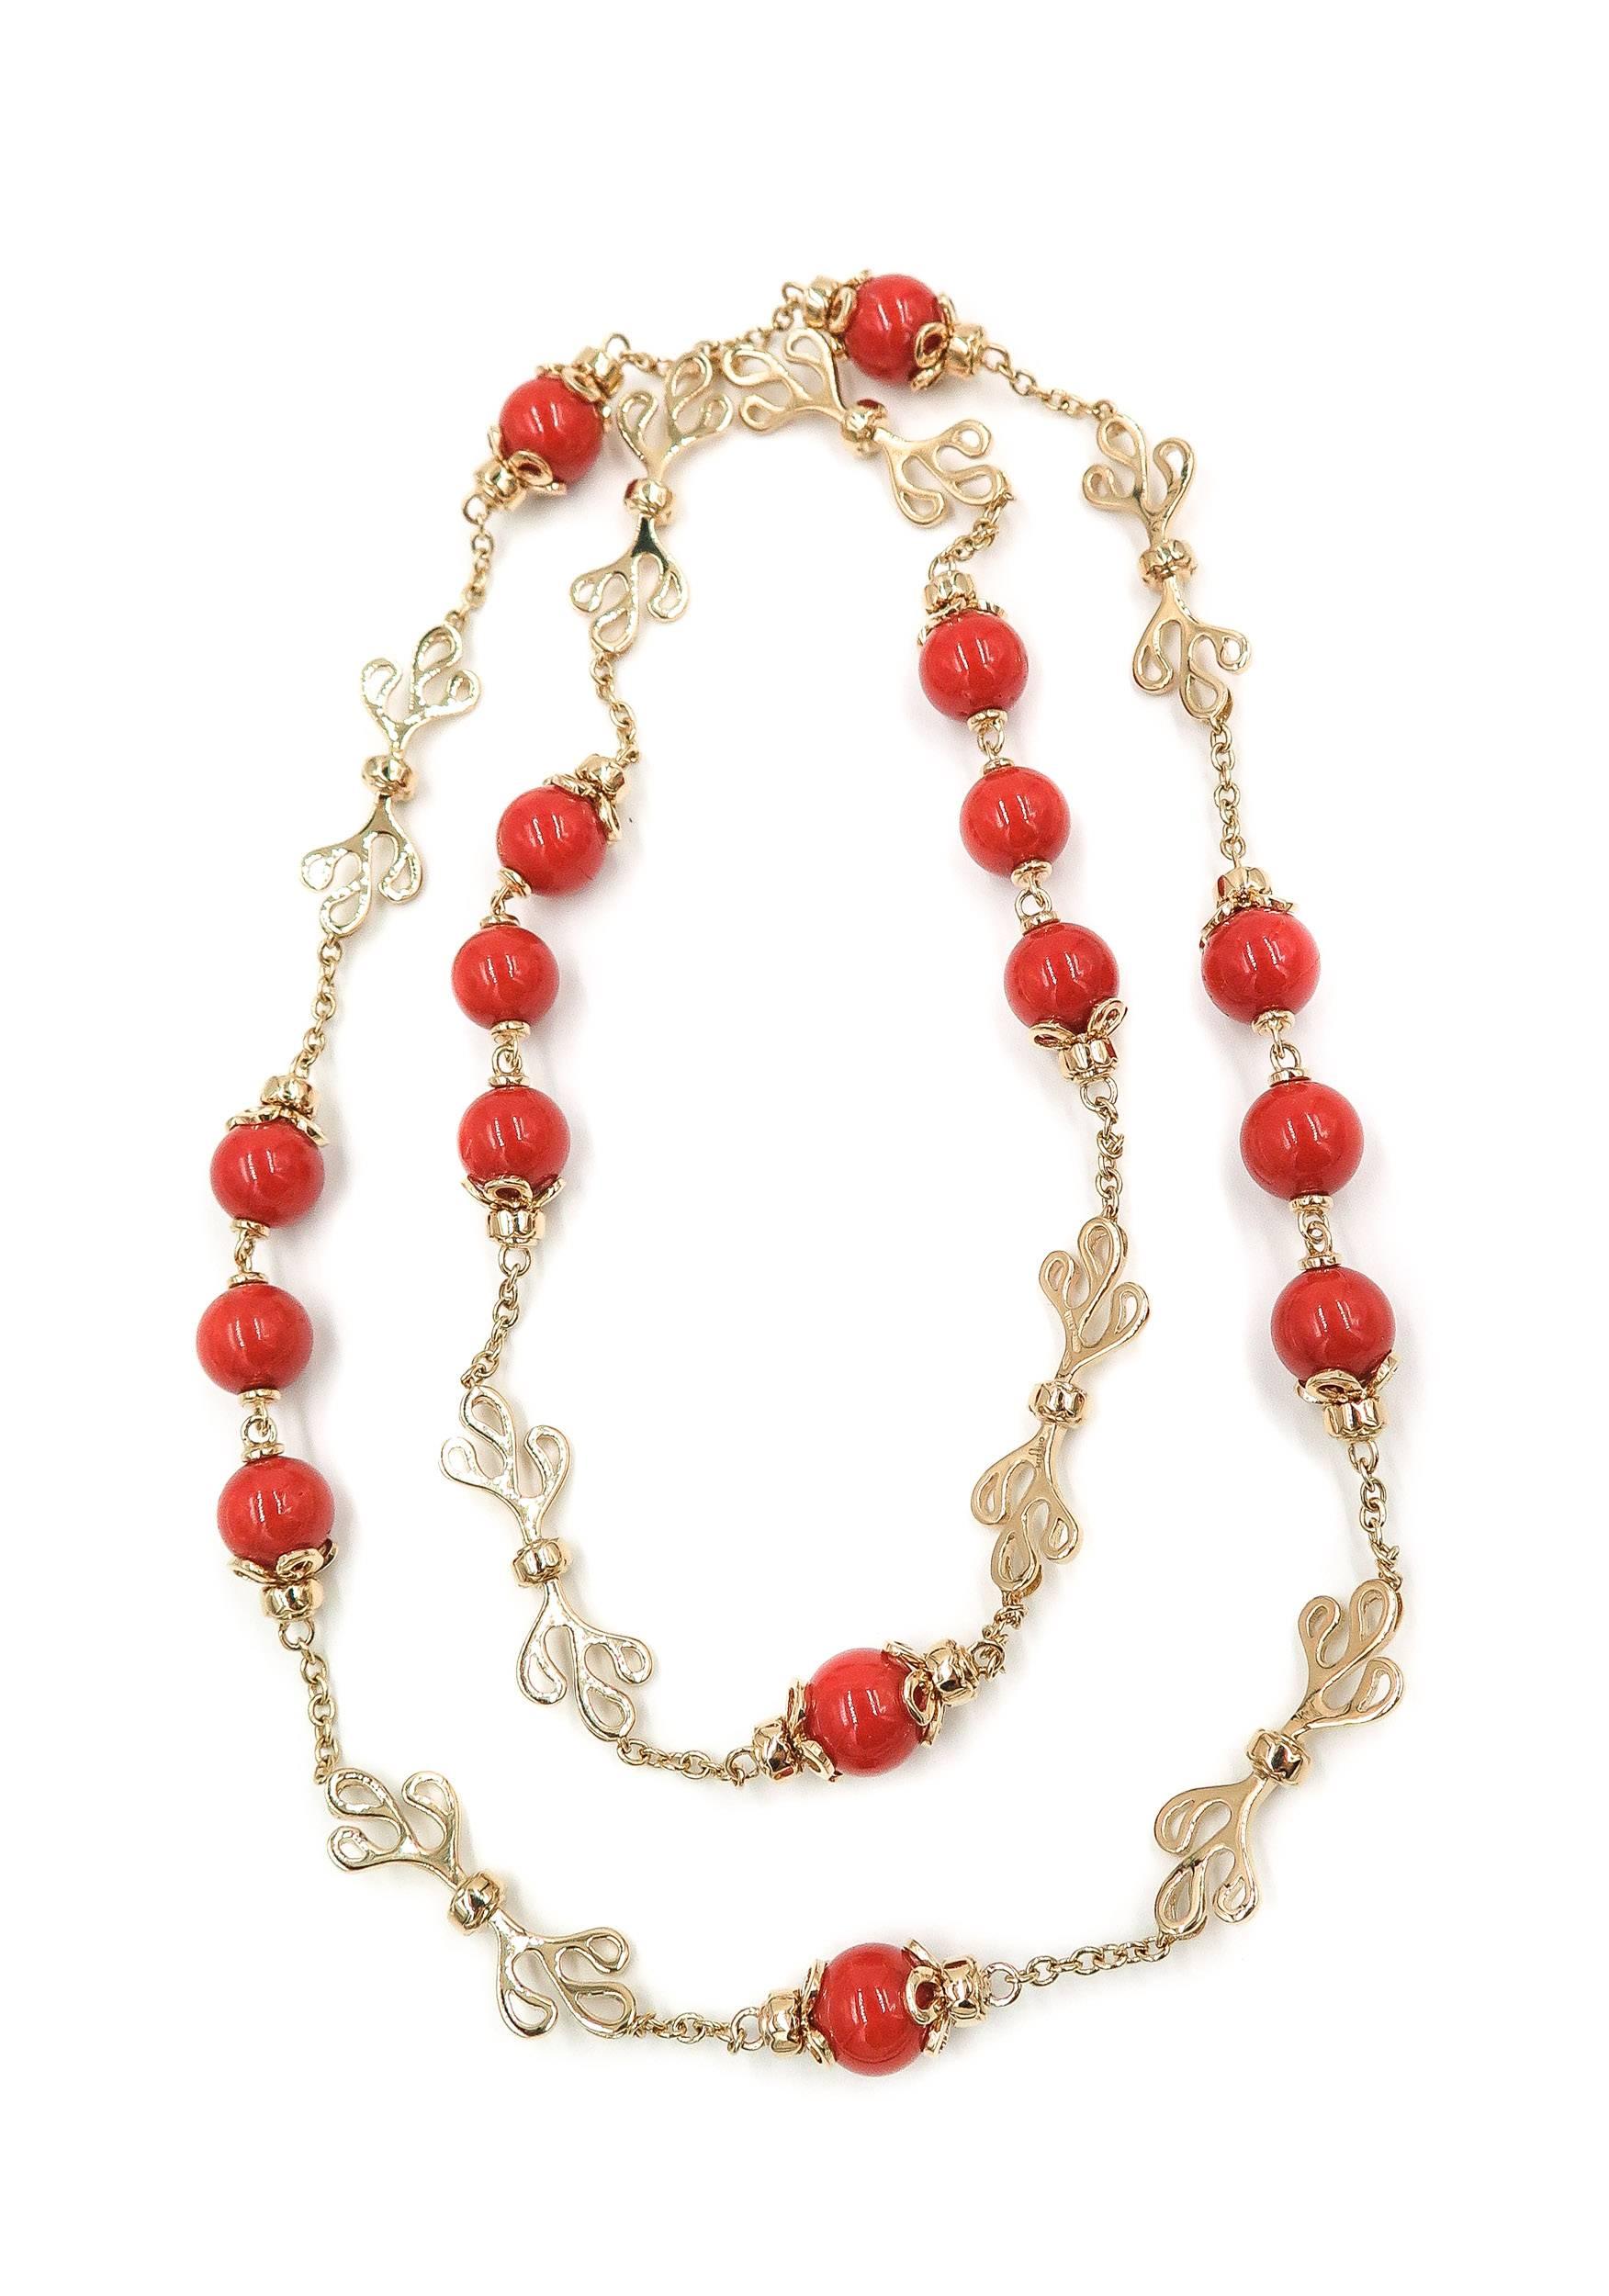 The elements of nature and the sea is captured in this endless Coral Necklace.  Designed and handcrafted by expert Italian Artisans, resulting in a stunning Coral Necklace.
Beautifully embellished by 18k gold sea leaves that accent the coral beads,